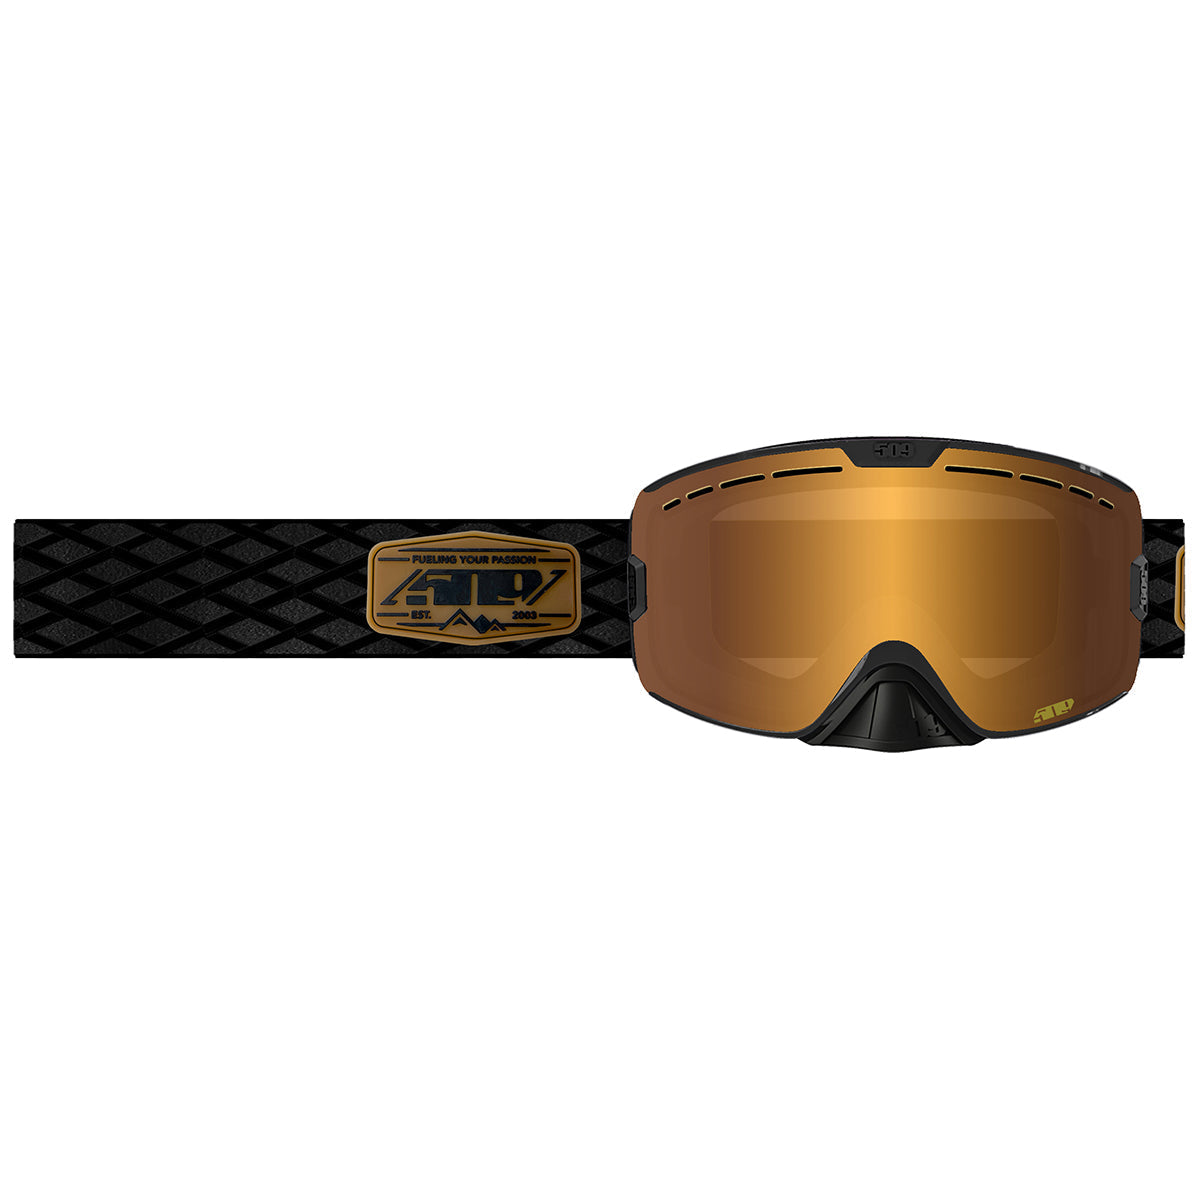 For Sale - Snow/Motocross Goggle OEM New Oakley Replacement Straps